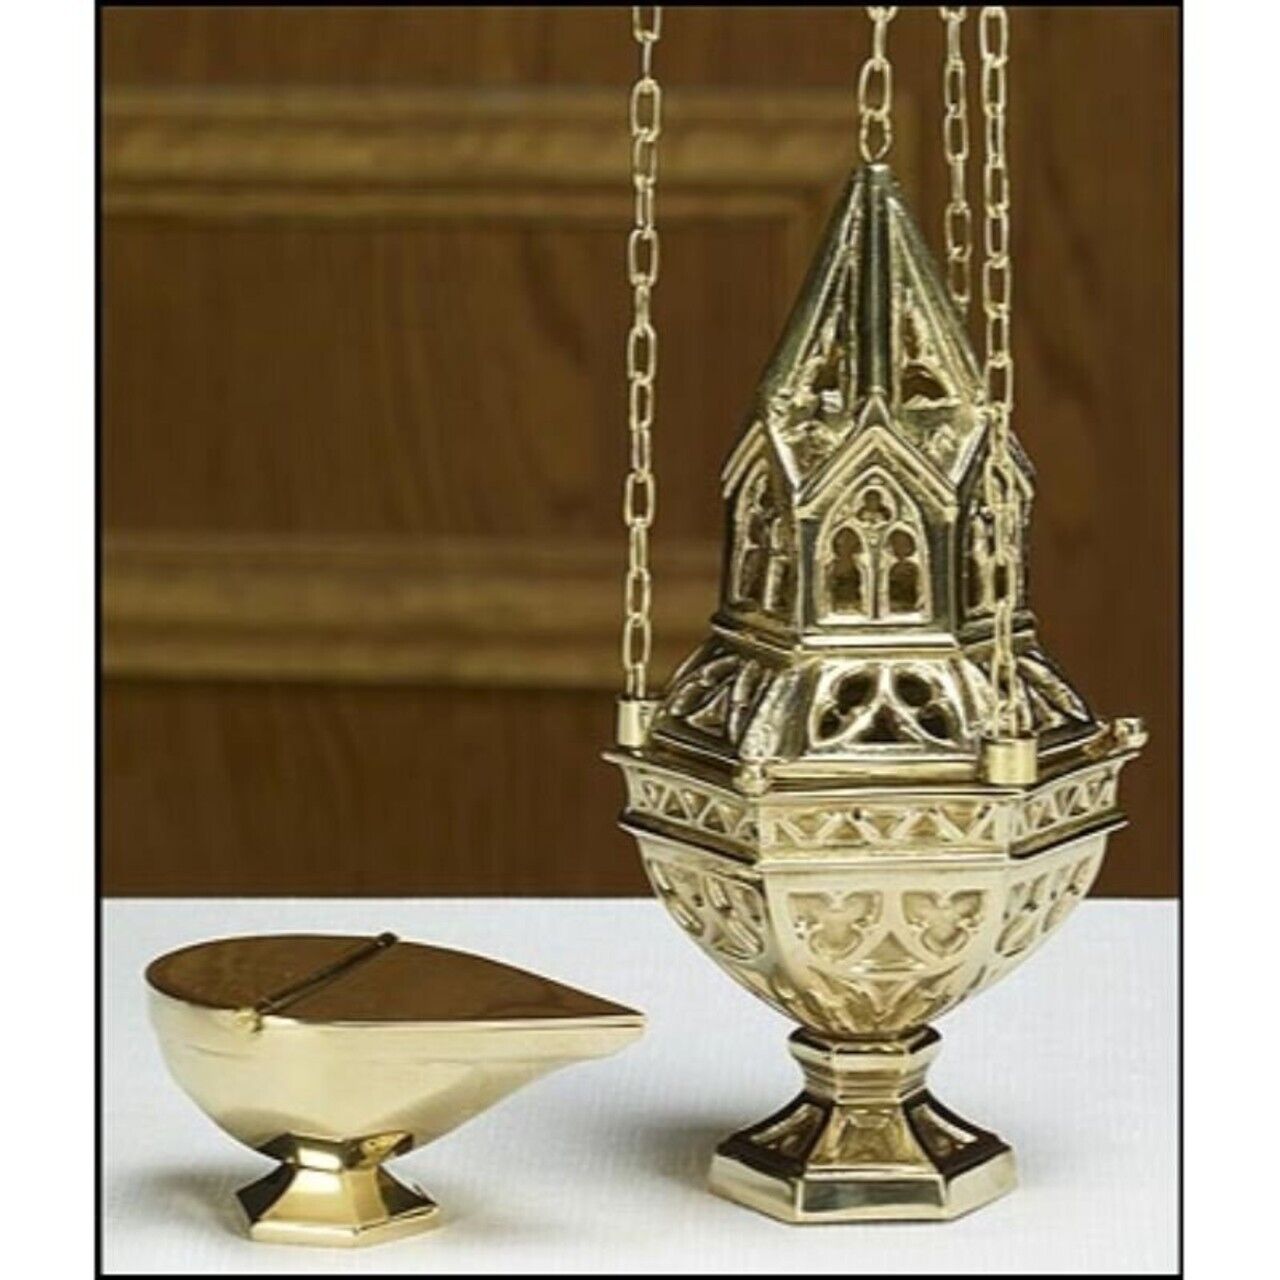 Ornate Hanging Embossed Censer and Boat Set For Church or Sanctuary 10 In